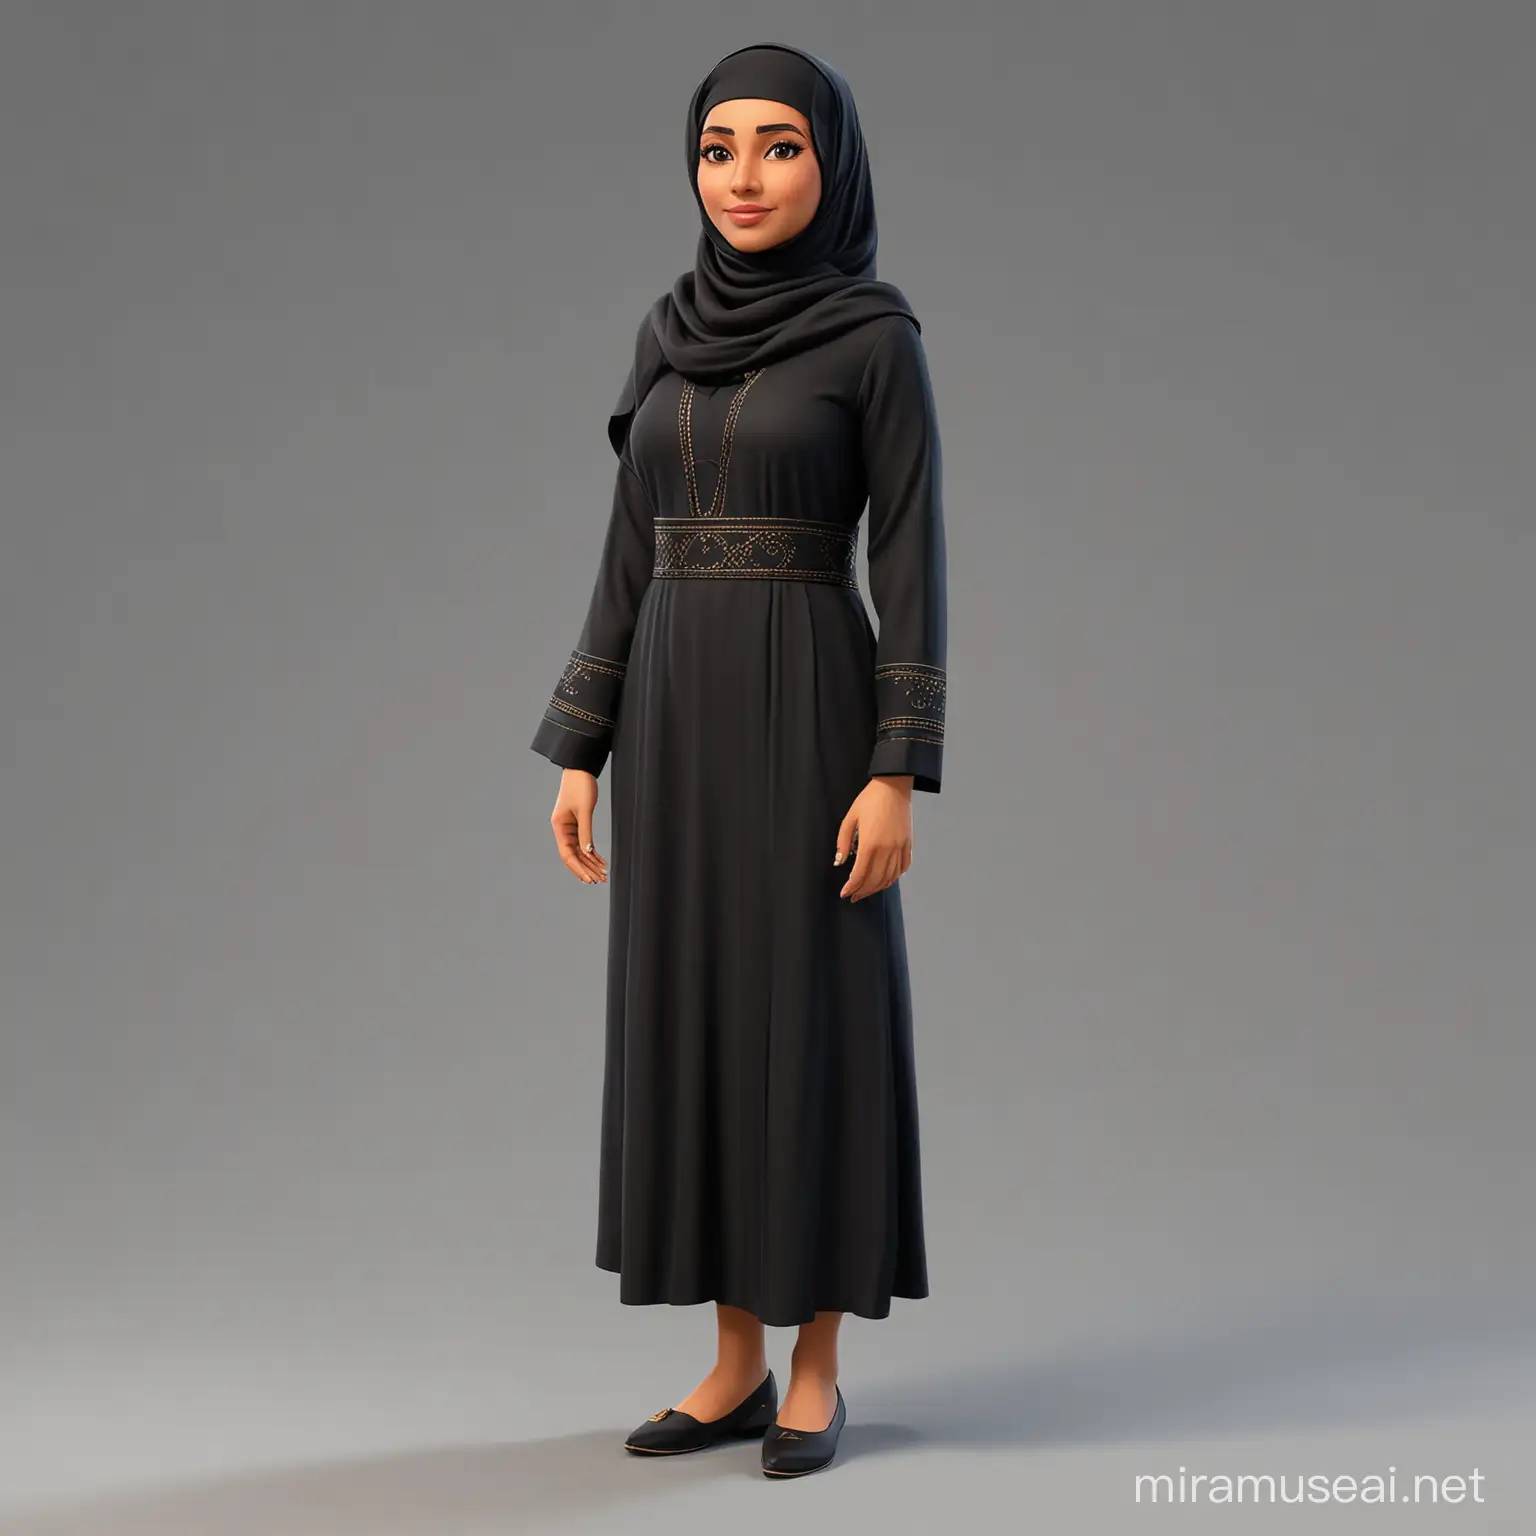 Create a female 3D cartoon avatar of a UAE women in black local attire wearing abhaya with plain background full length, from head to toe.

